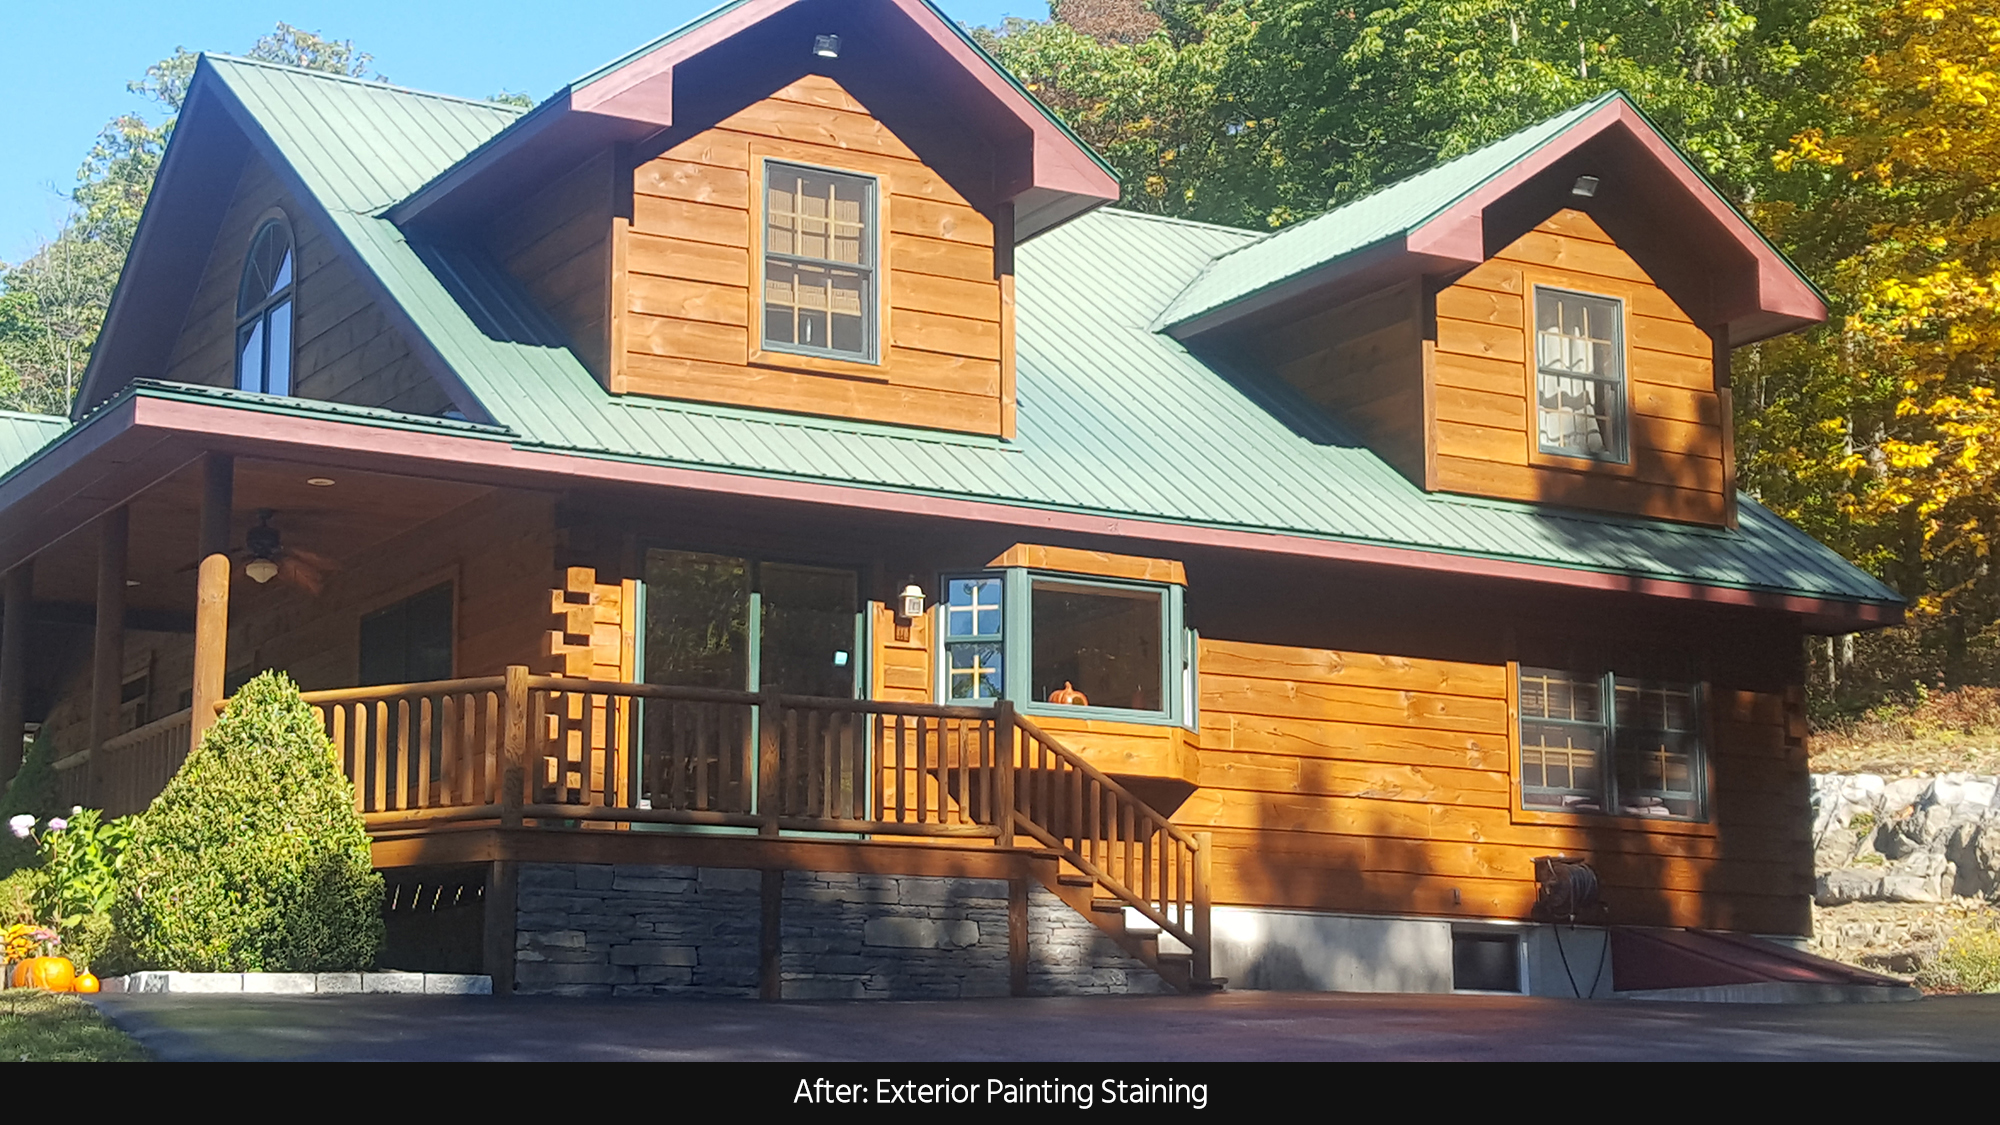 Exterior Painting Gallery